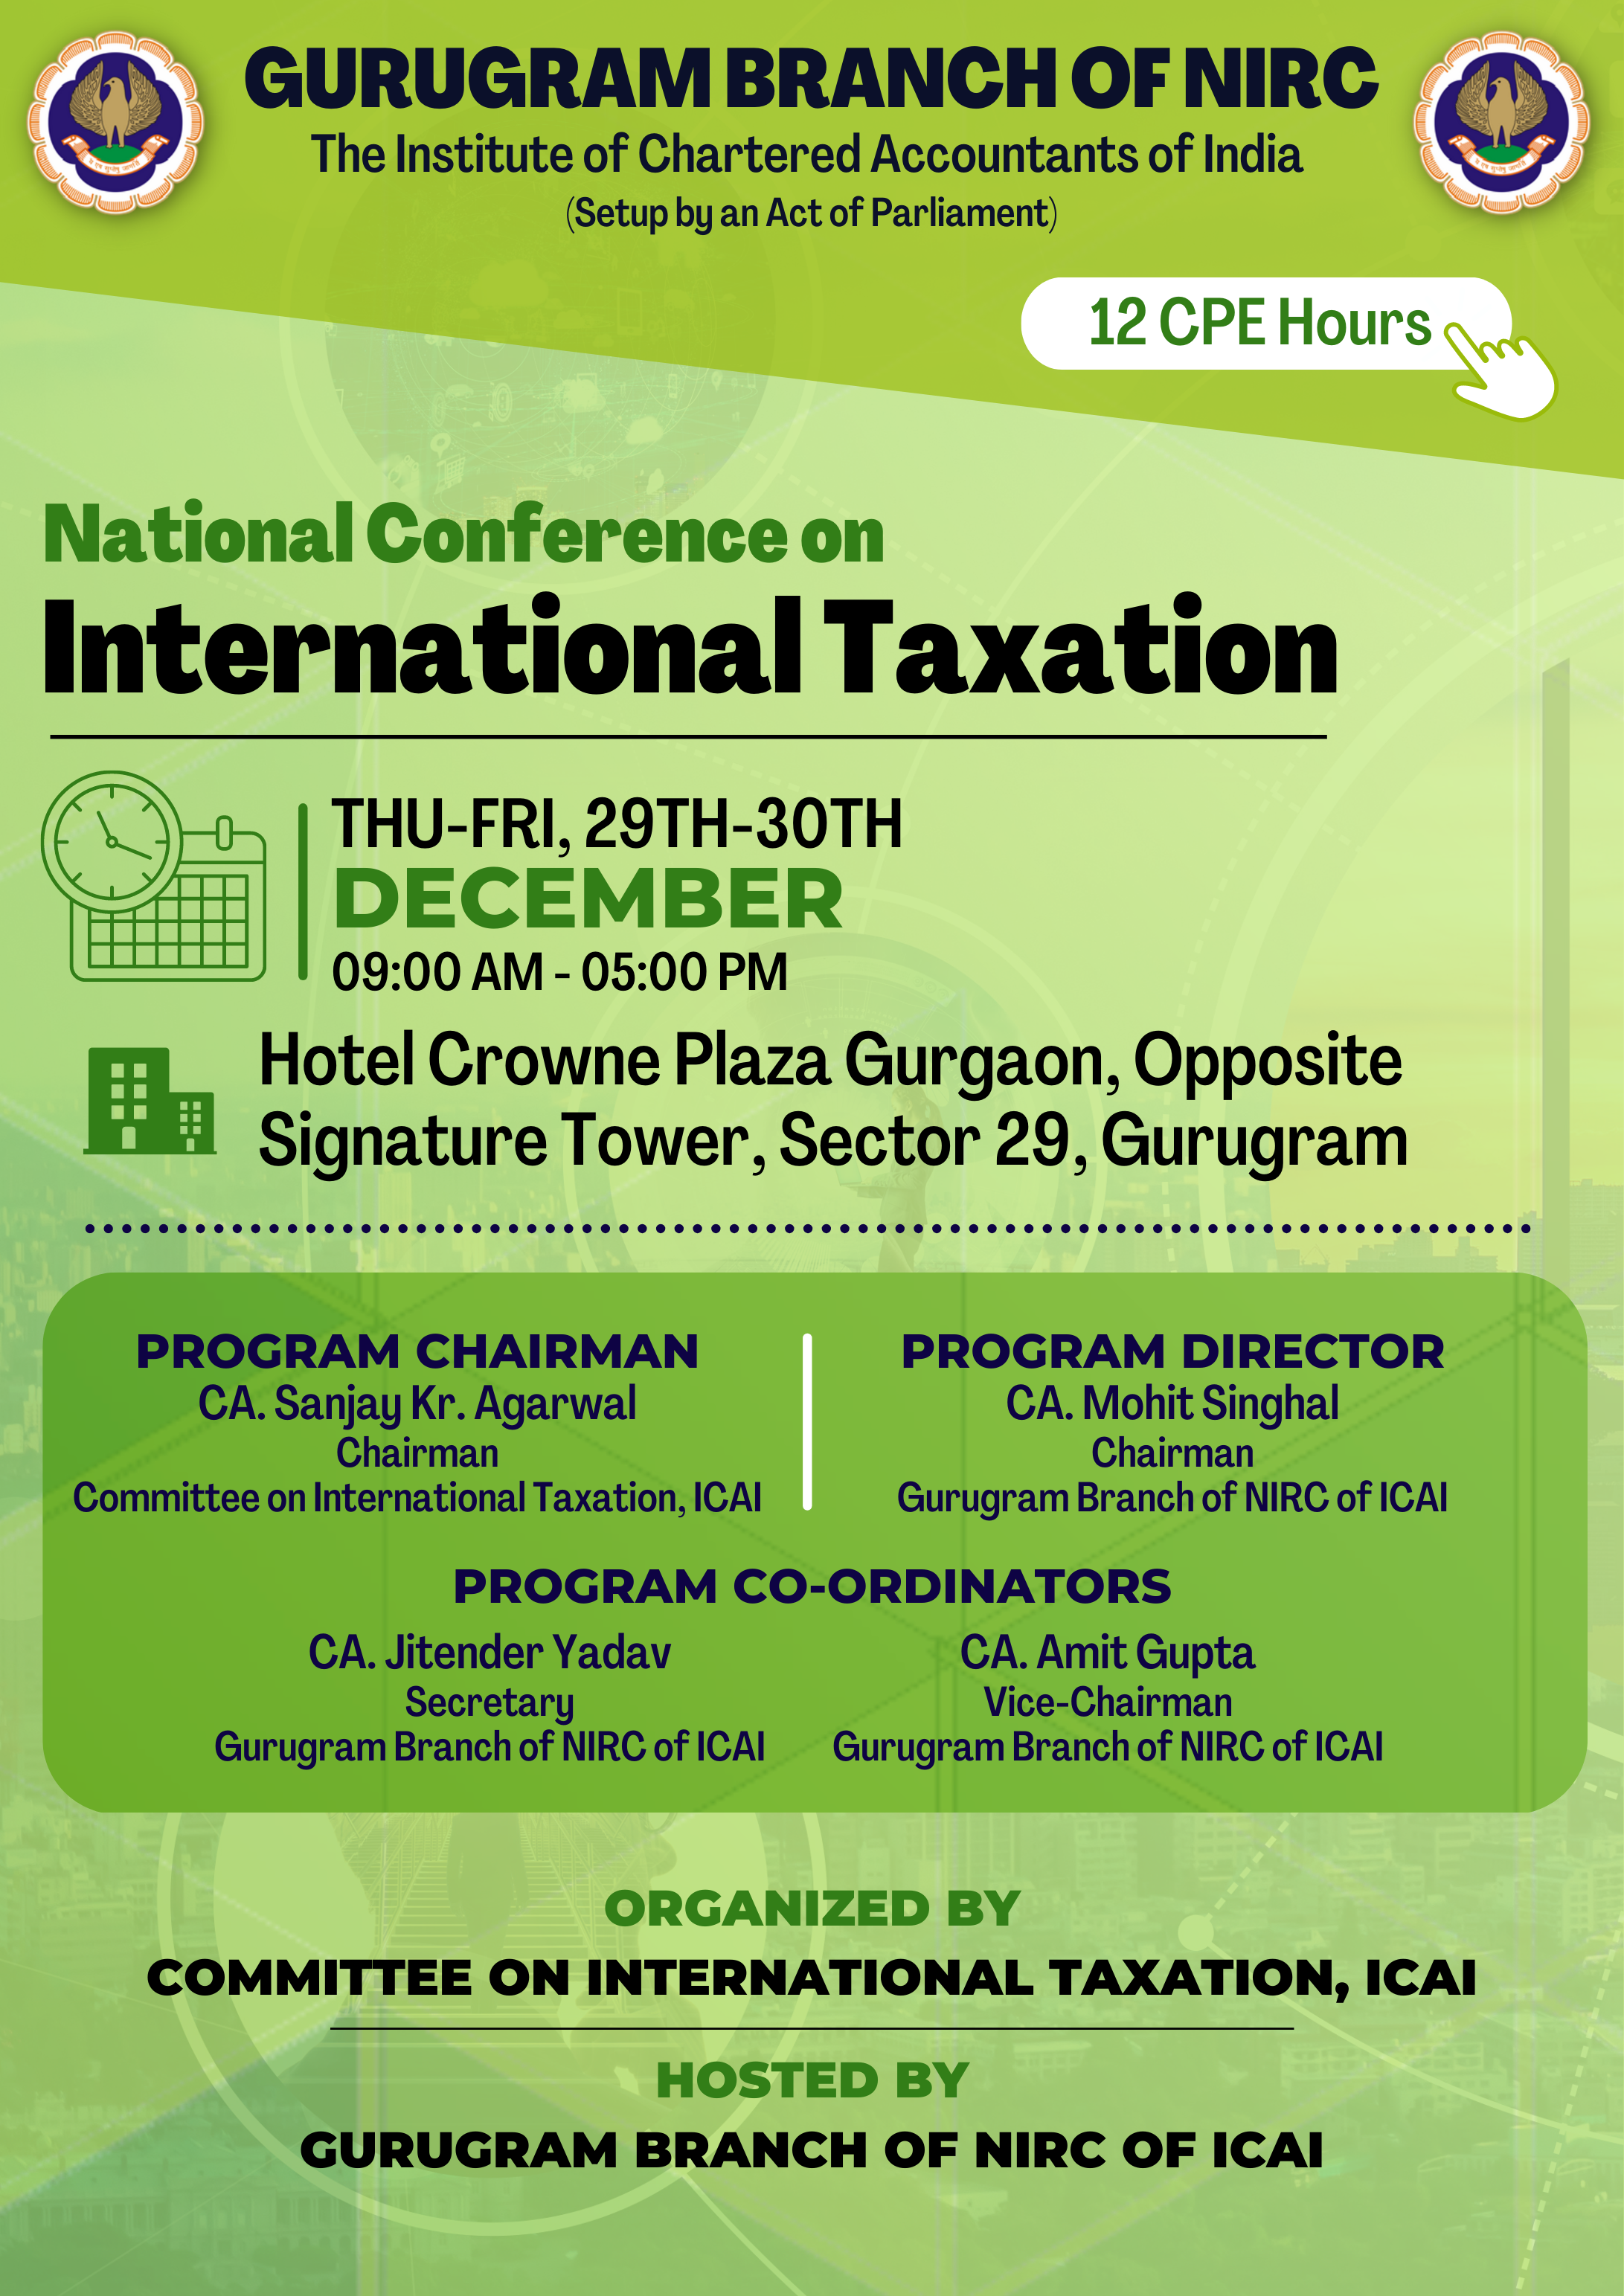 National Conference on International Taxation